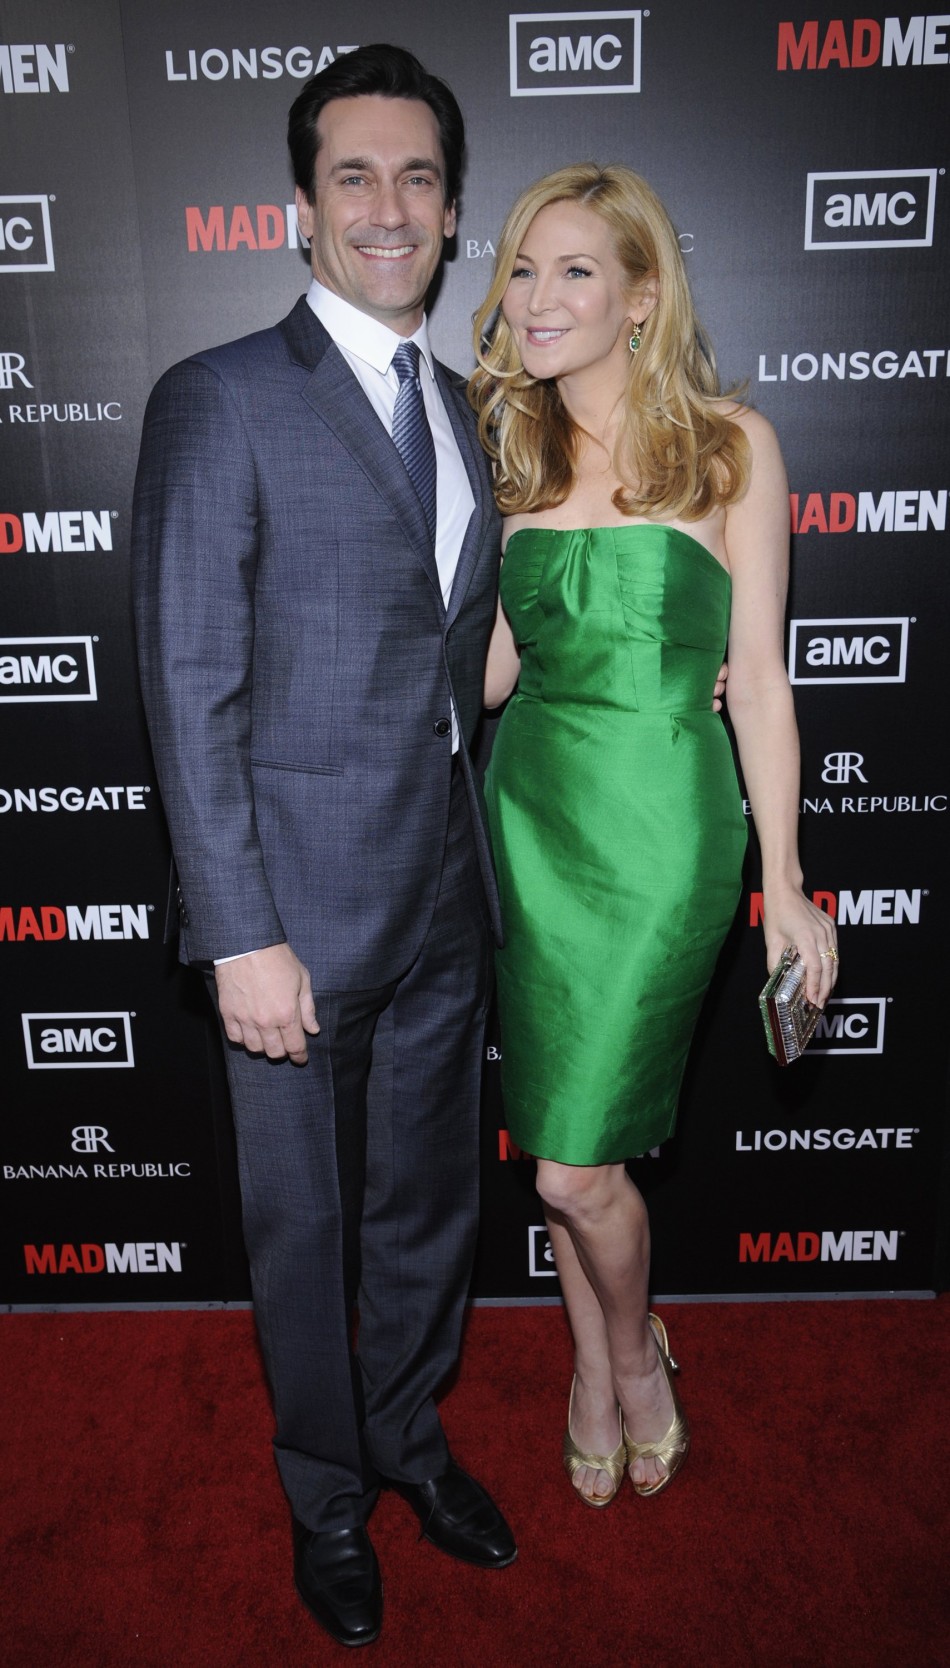 Cast member Hamm and actress Westfeldt attend a premiere screening of quotMad Menquot in Los Angeles